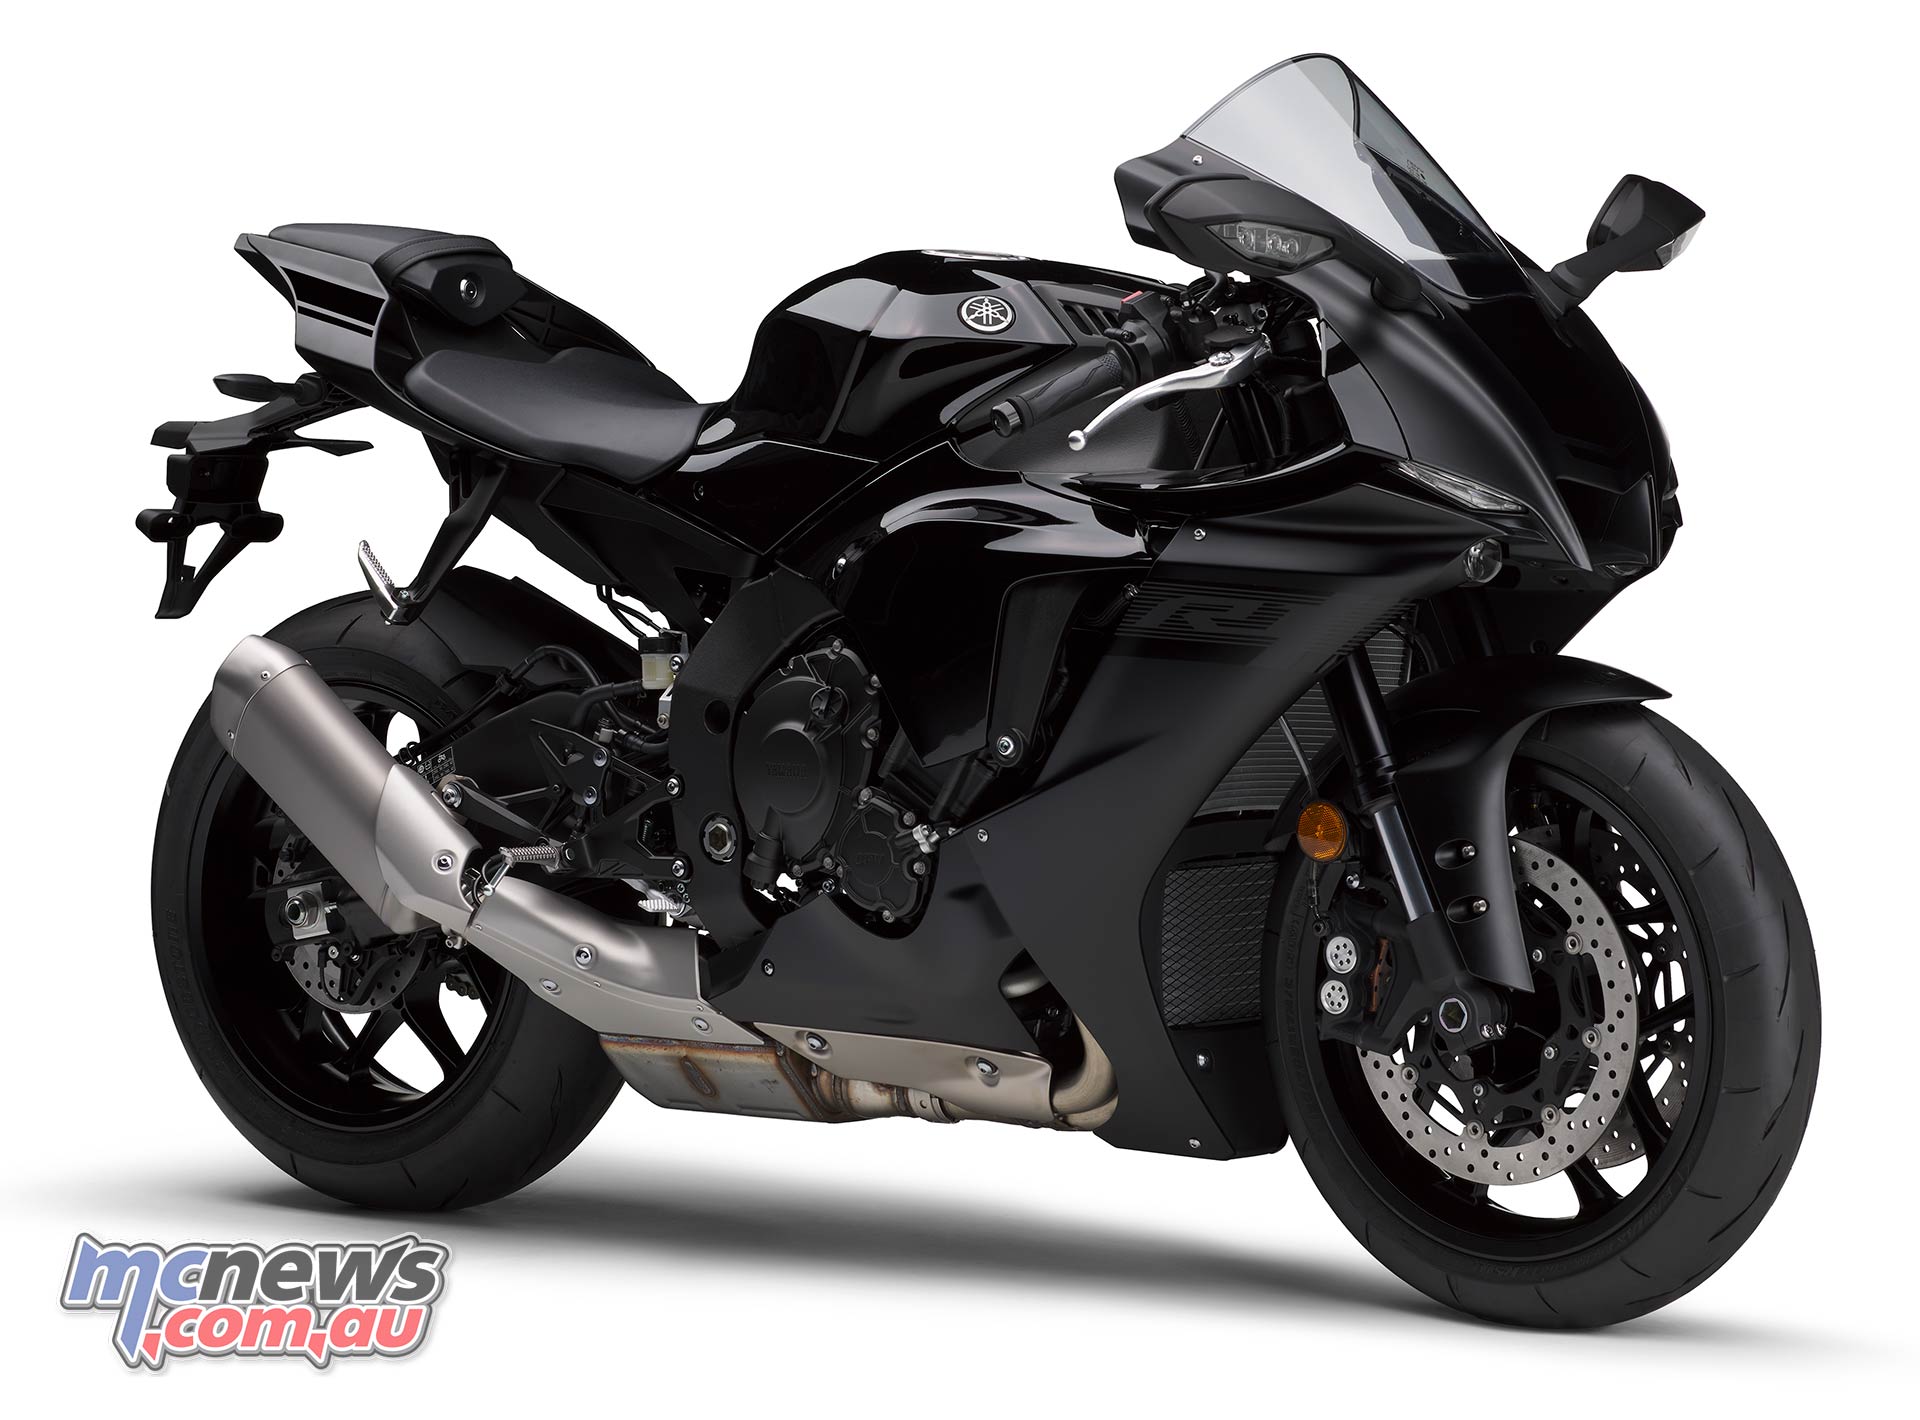 2020 Yamaha YZF-R1 and 2020 YZF-R1M here now ...